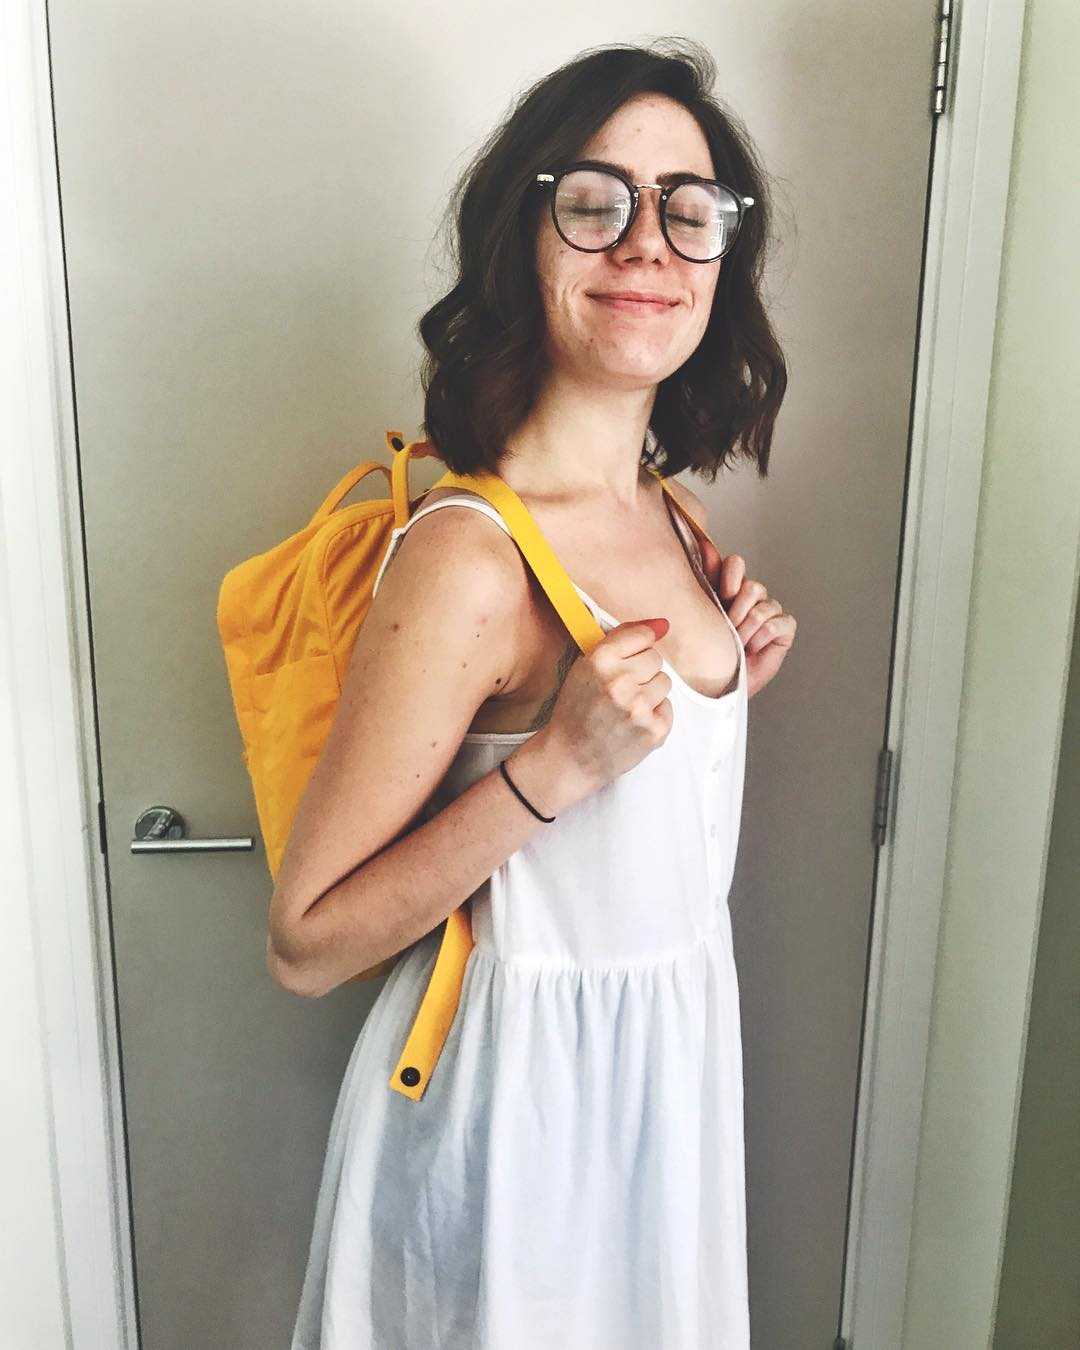 51 Hottest Dodie Big Butt Pictures Demonstrate That She Has Most Sweltering Legs 15